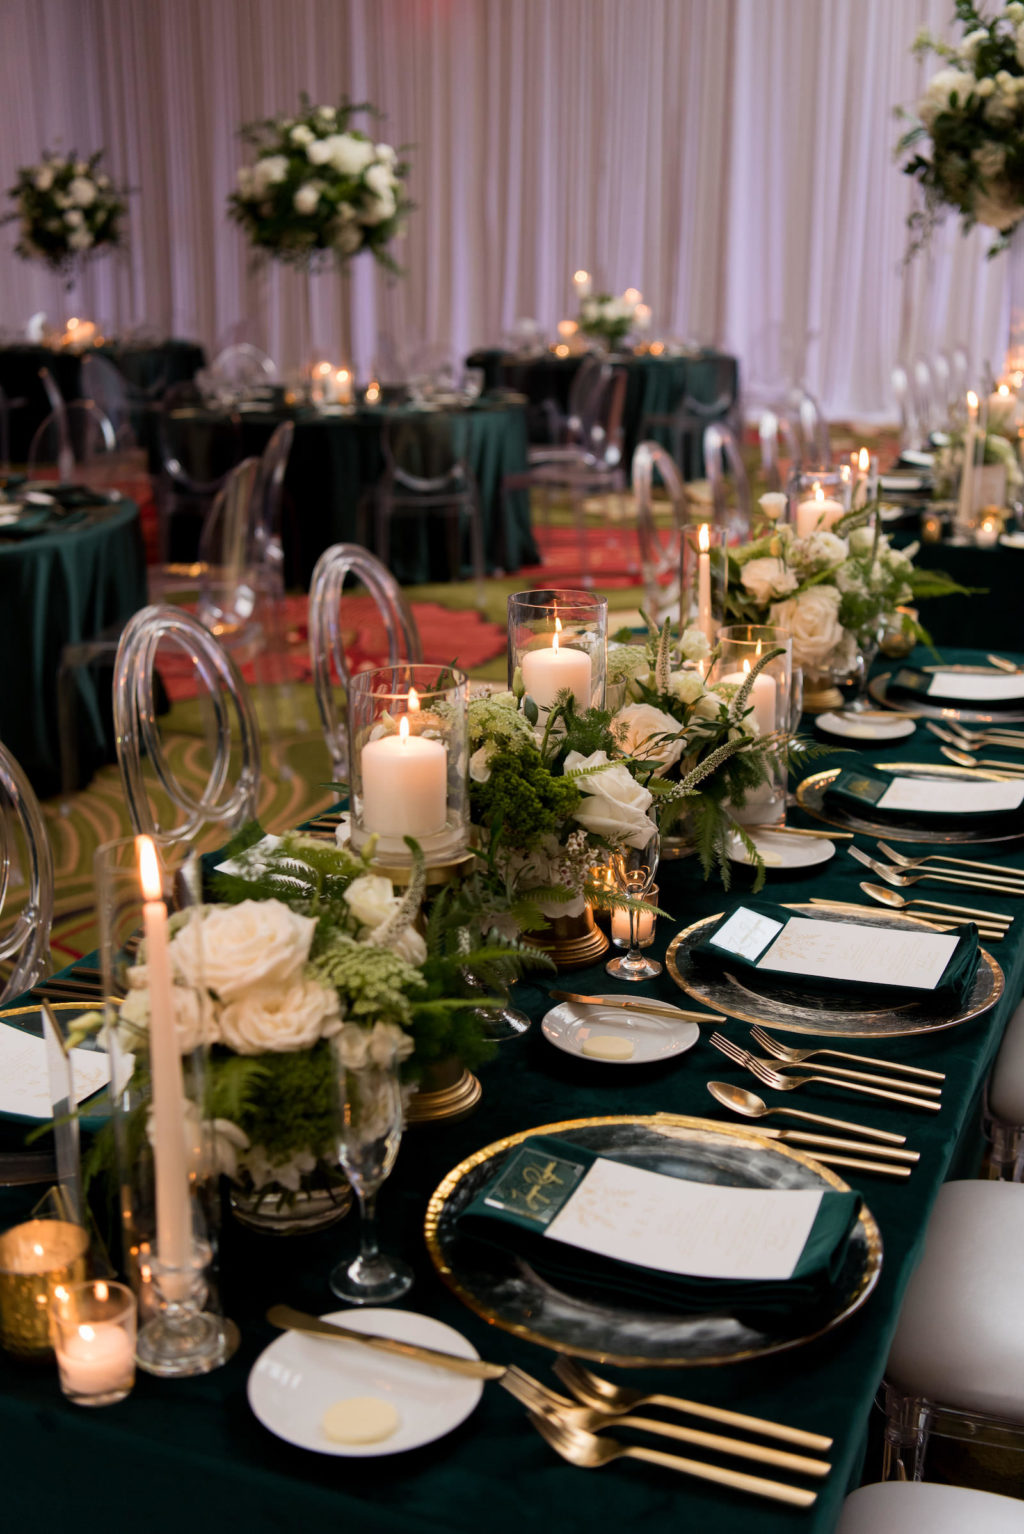 Elegant Wedding Reception Decor, Long Feasting Table with Emerald Green Linens, Gold Rimmed Chargers and Flatware Candles, Low White Roses and Greenery Floral Arrangements, Acrylic Chiavari Chairs | Tampa Bay Wedding Planner Parties A'la Carte | Wedding Chairs, Chargers, Chairs and Flatware Rentals A Chair Affair | Wedding Florist Bruce Wayne Florals